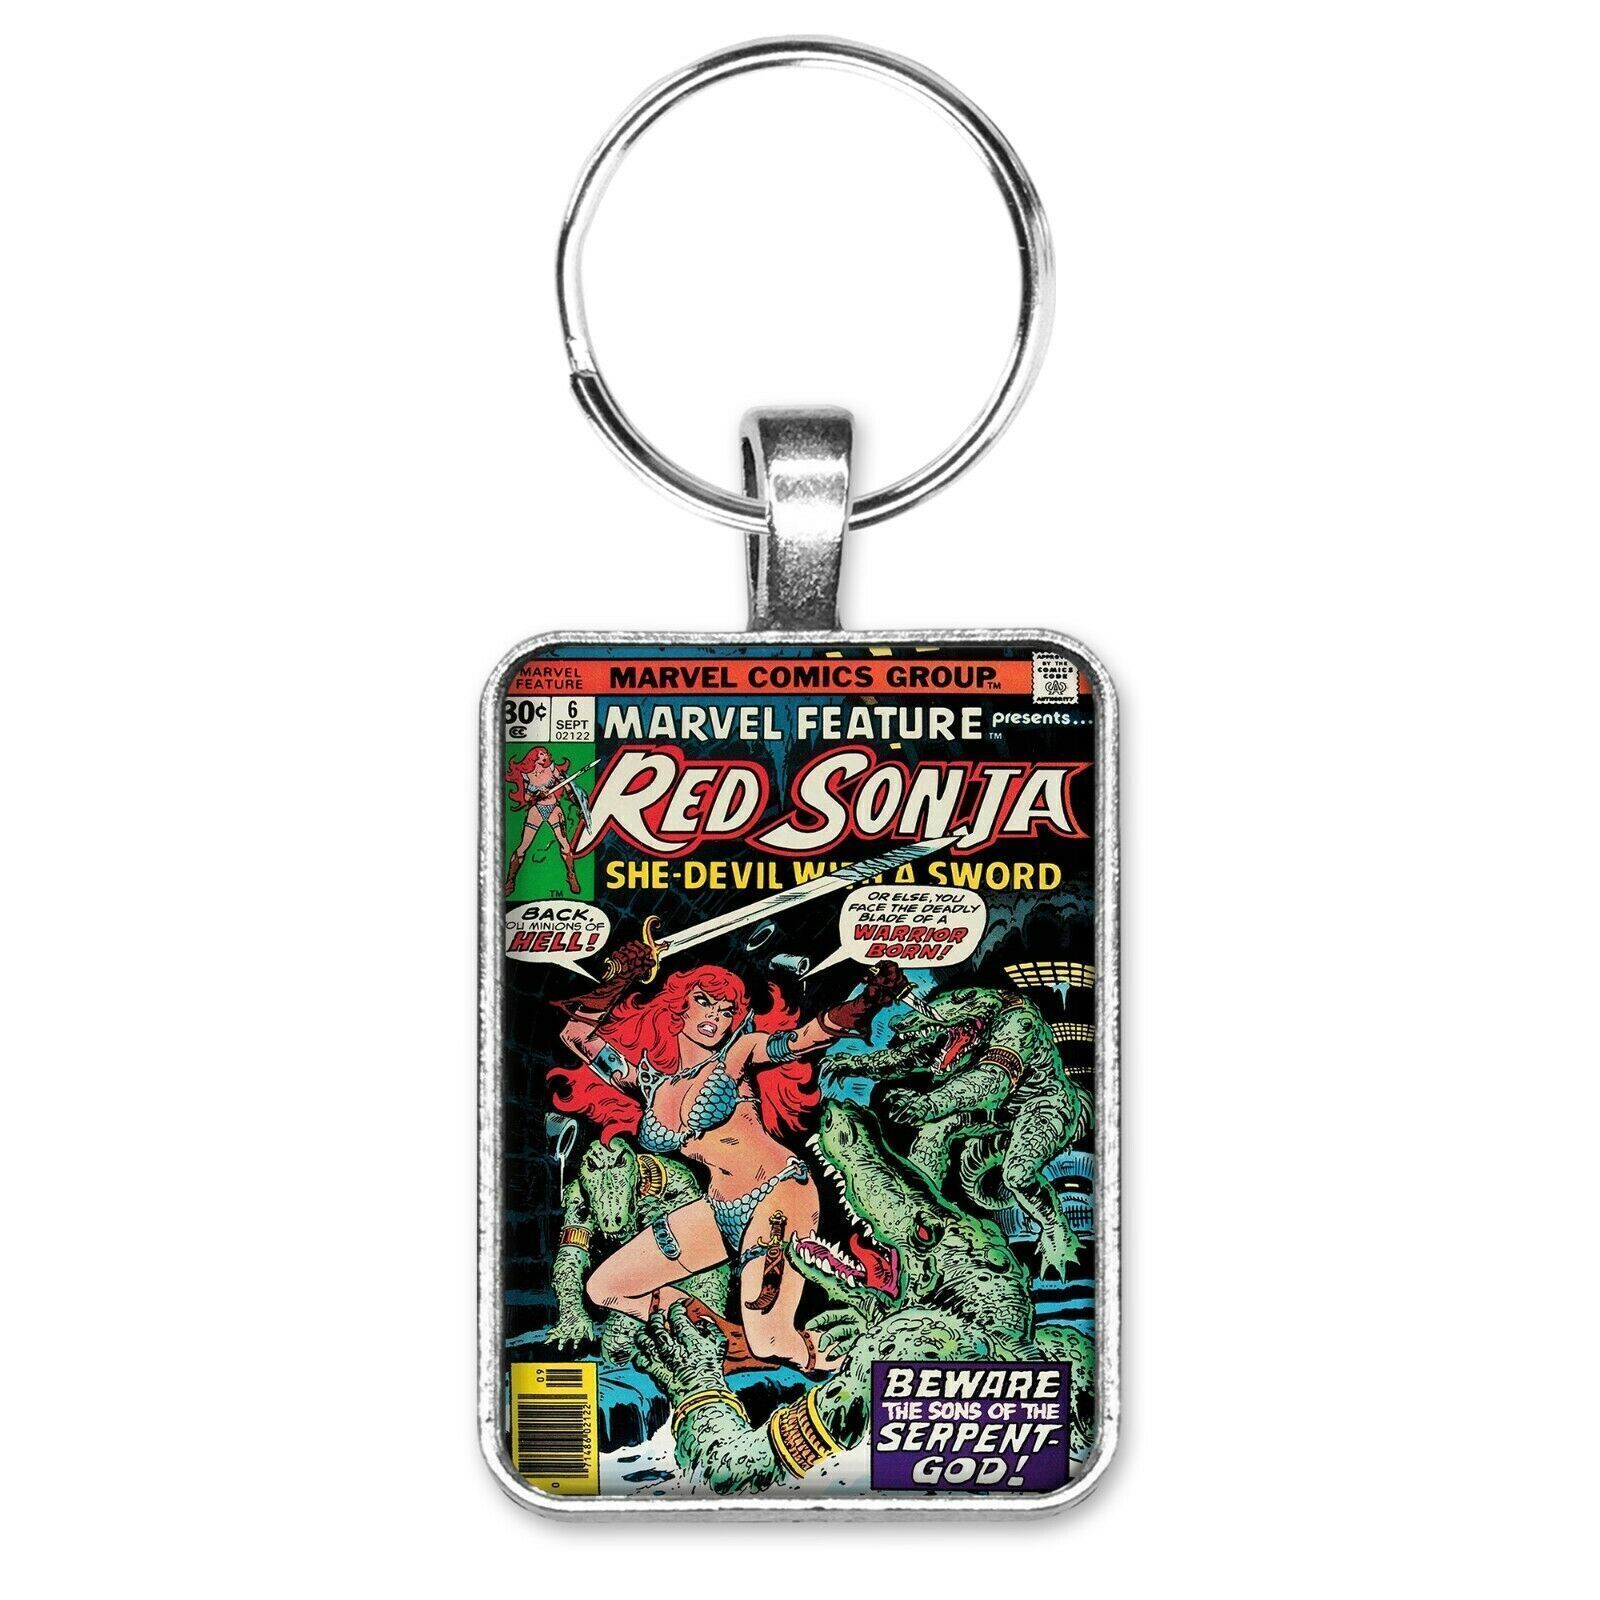 Marvel Feature Red Sonja She-Devil with a Sword #6 Cover Key Ring or Necklace